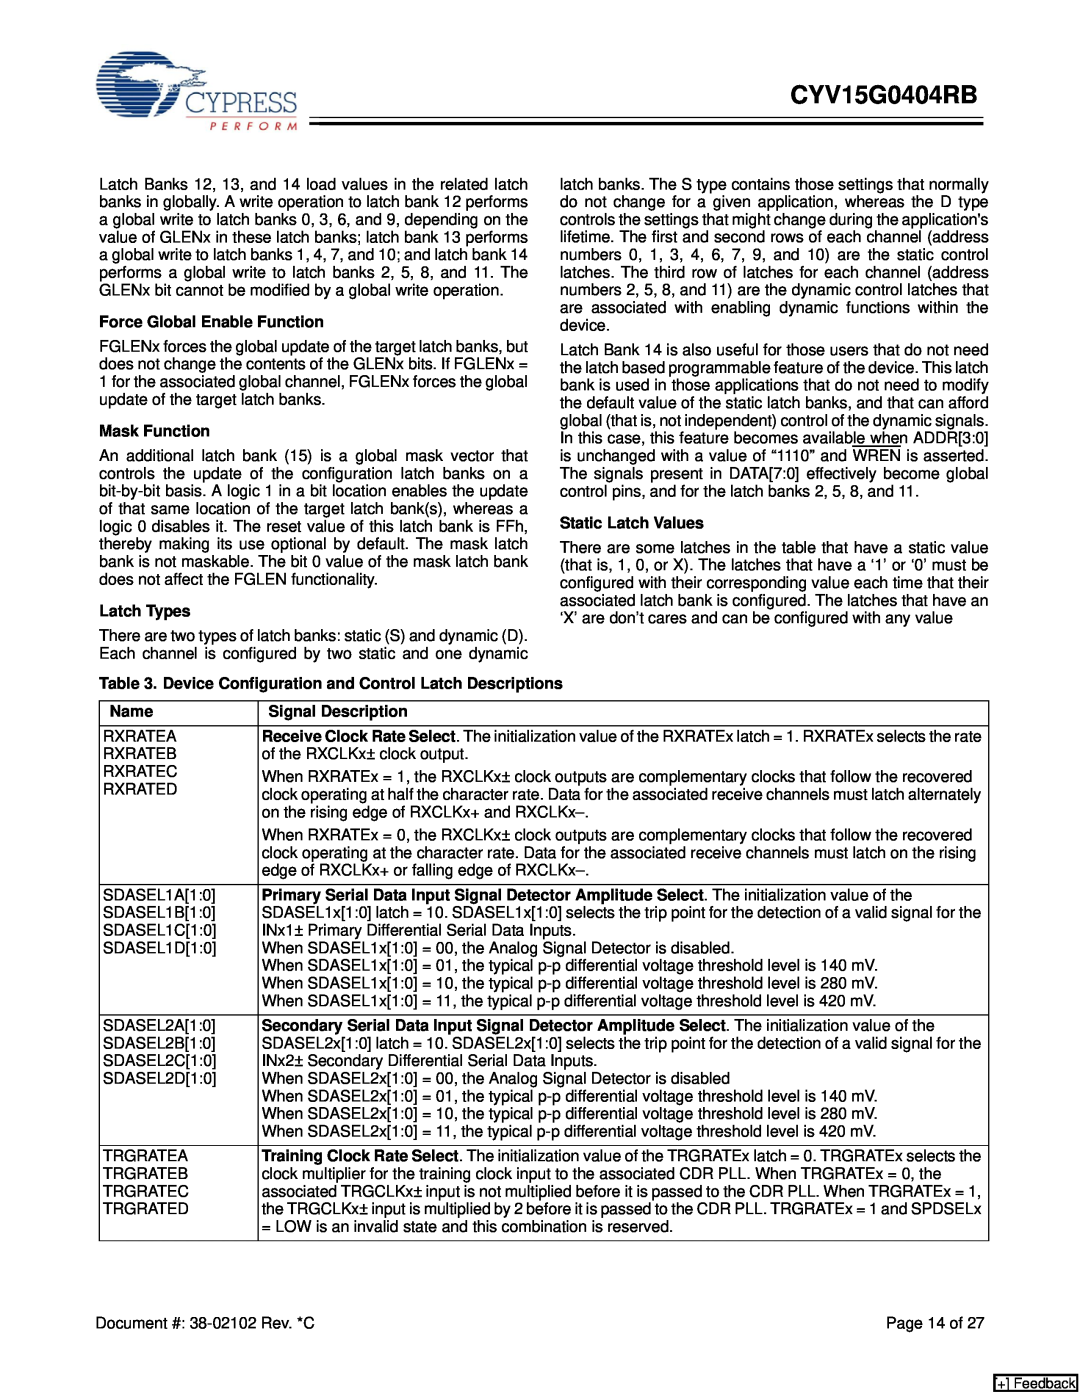 Cypress CYV15G0404RB manual Page 14 of 